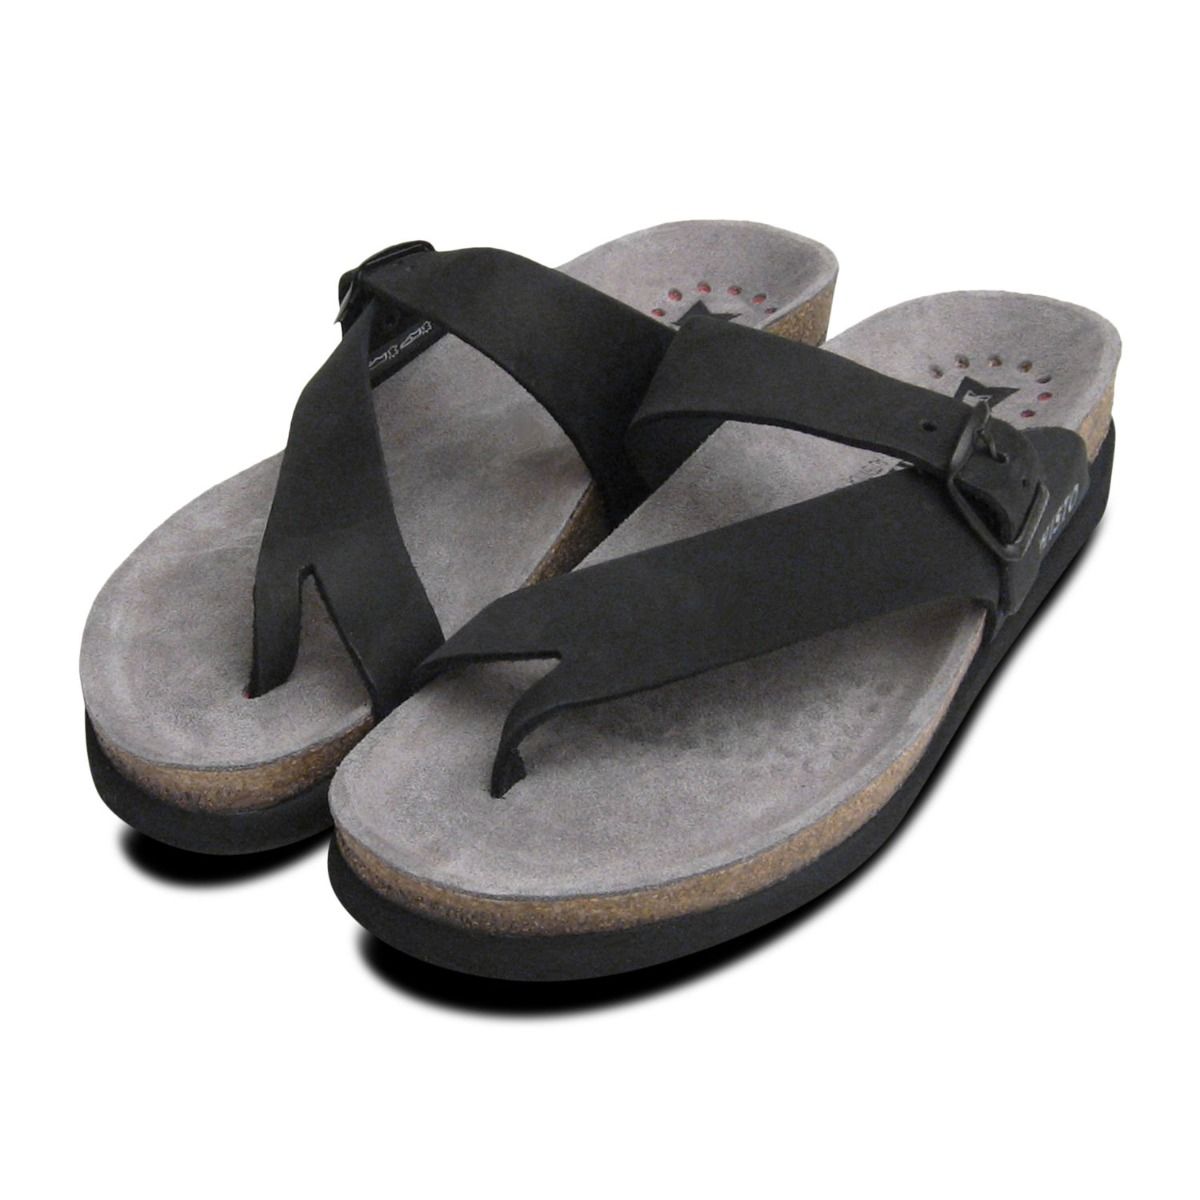 Mephisto Helen Womens Ladies Air Cushioned Toe Post Walking Sandals Size 4-7.5 